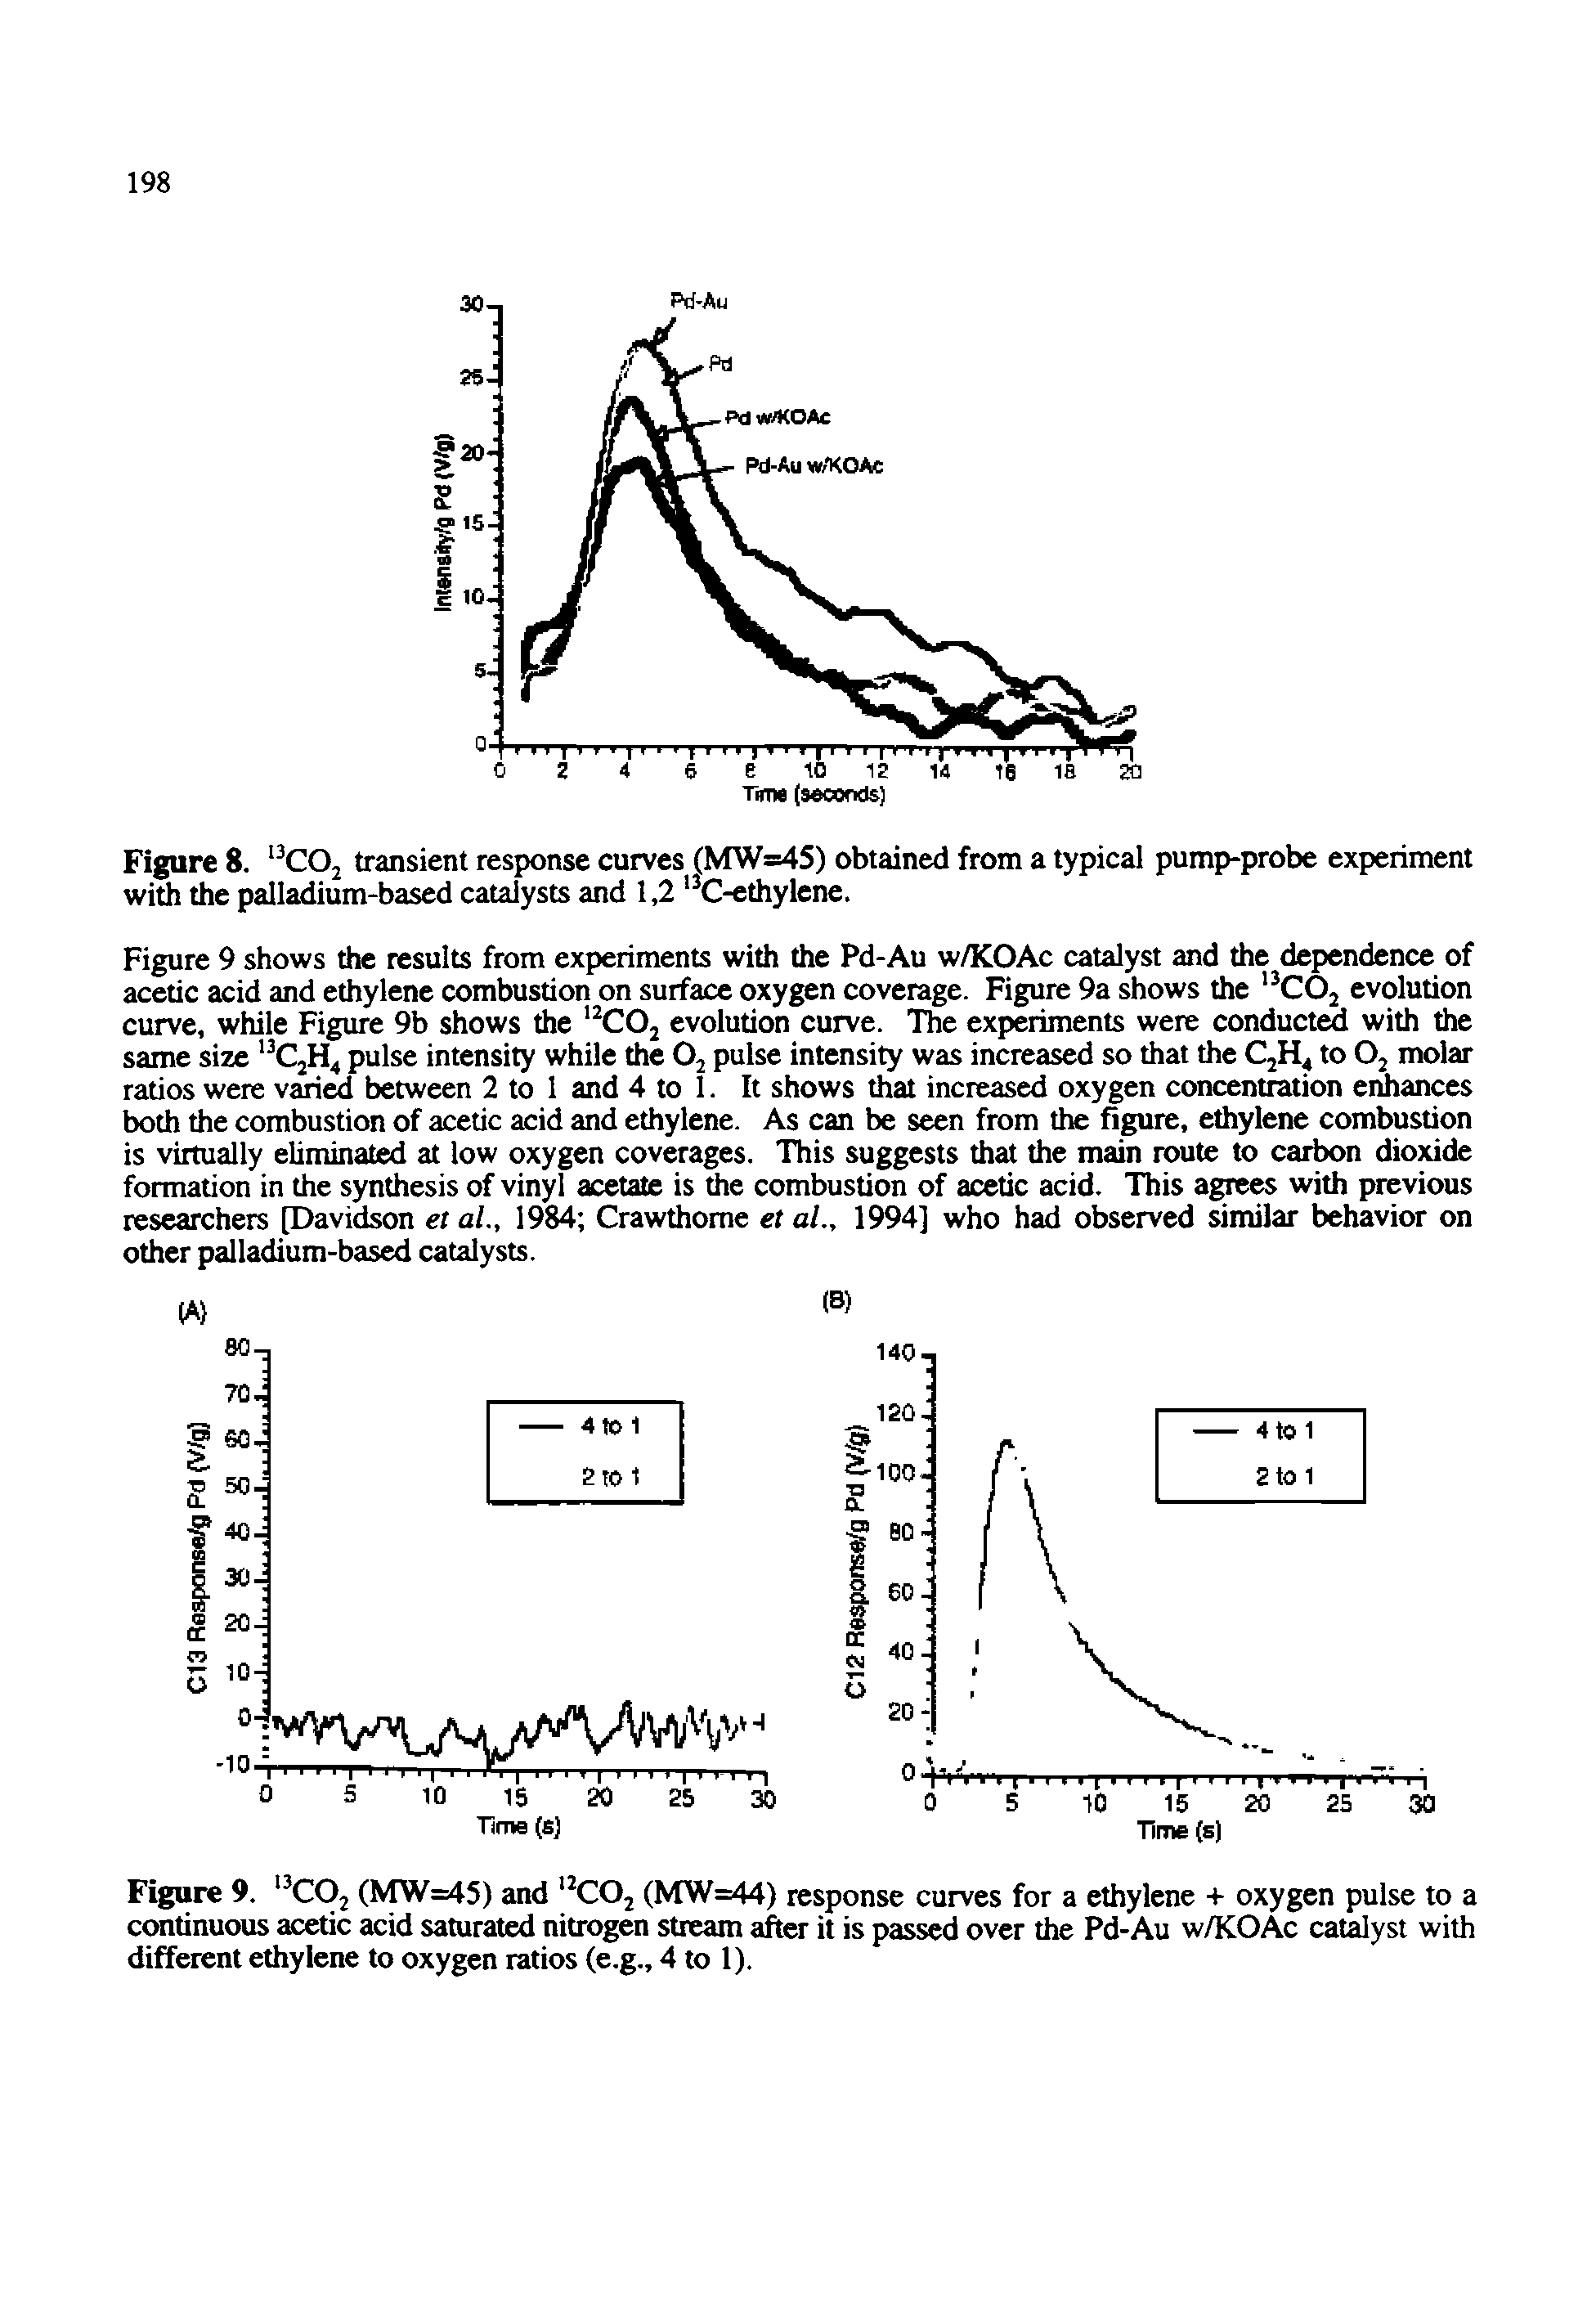 Figure 9. COj (MW=45) and COj (MW=44) response curves for a ethylene -t- oxygen pulse to a continuous acetic acid saturated nitrogen stream after it is passed over the Pd-Au w/KOAc catalyst with different ethylene to oxygen ratios (e.g., 4 to 1).